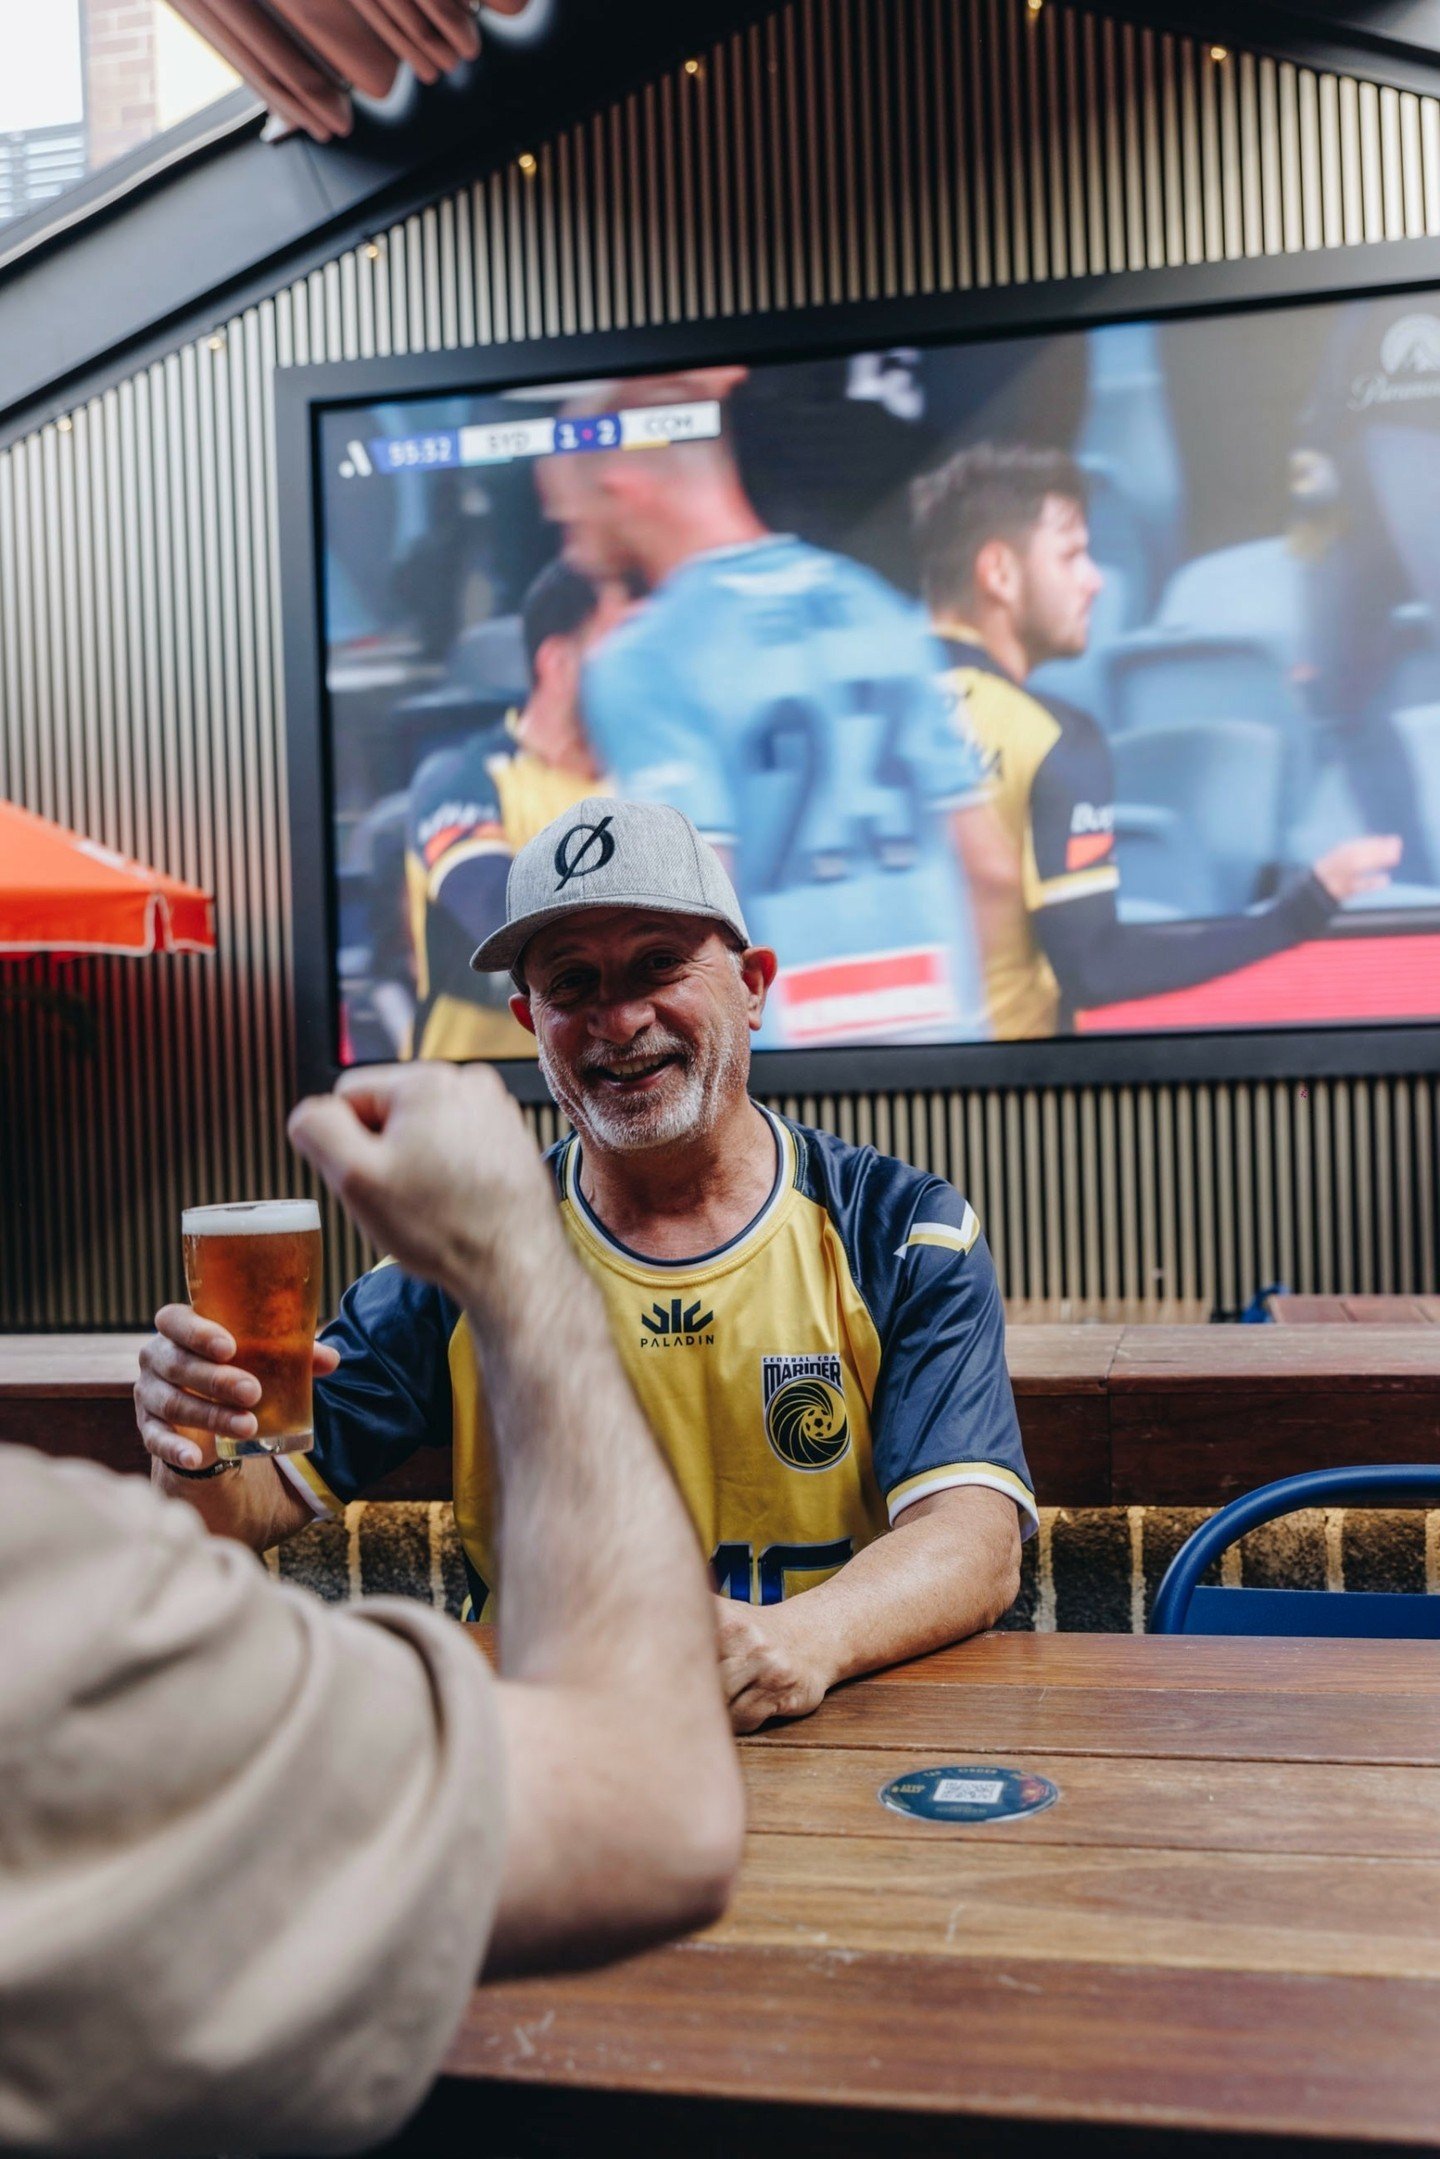 Only 3 sleeps til' the @ccmariners take on Melbourne Victory in the 2024 A-League Grand Final!

Missed out on tickets? We'll be playing the game live on our mega screens &amp; serving Six Strings Mariners Lager while you cheer on our home team.

Our 